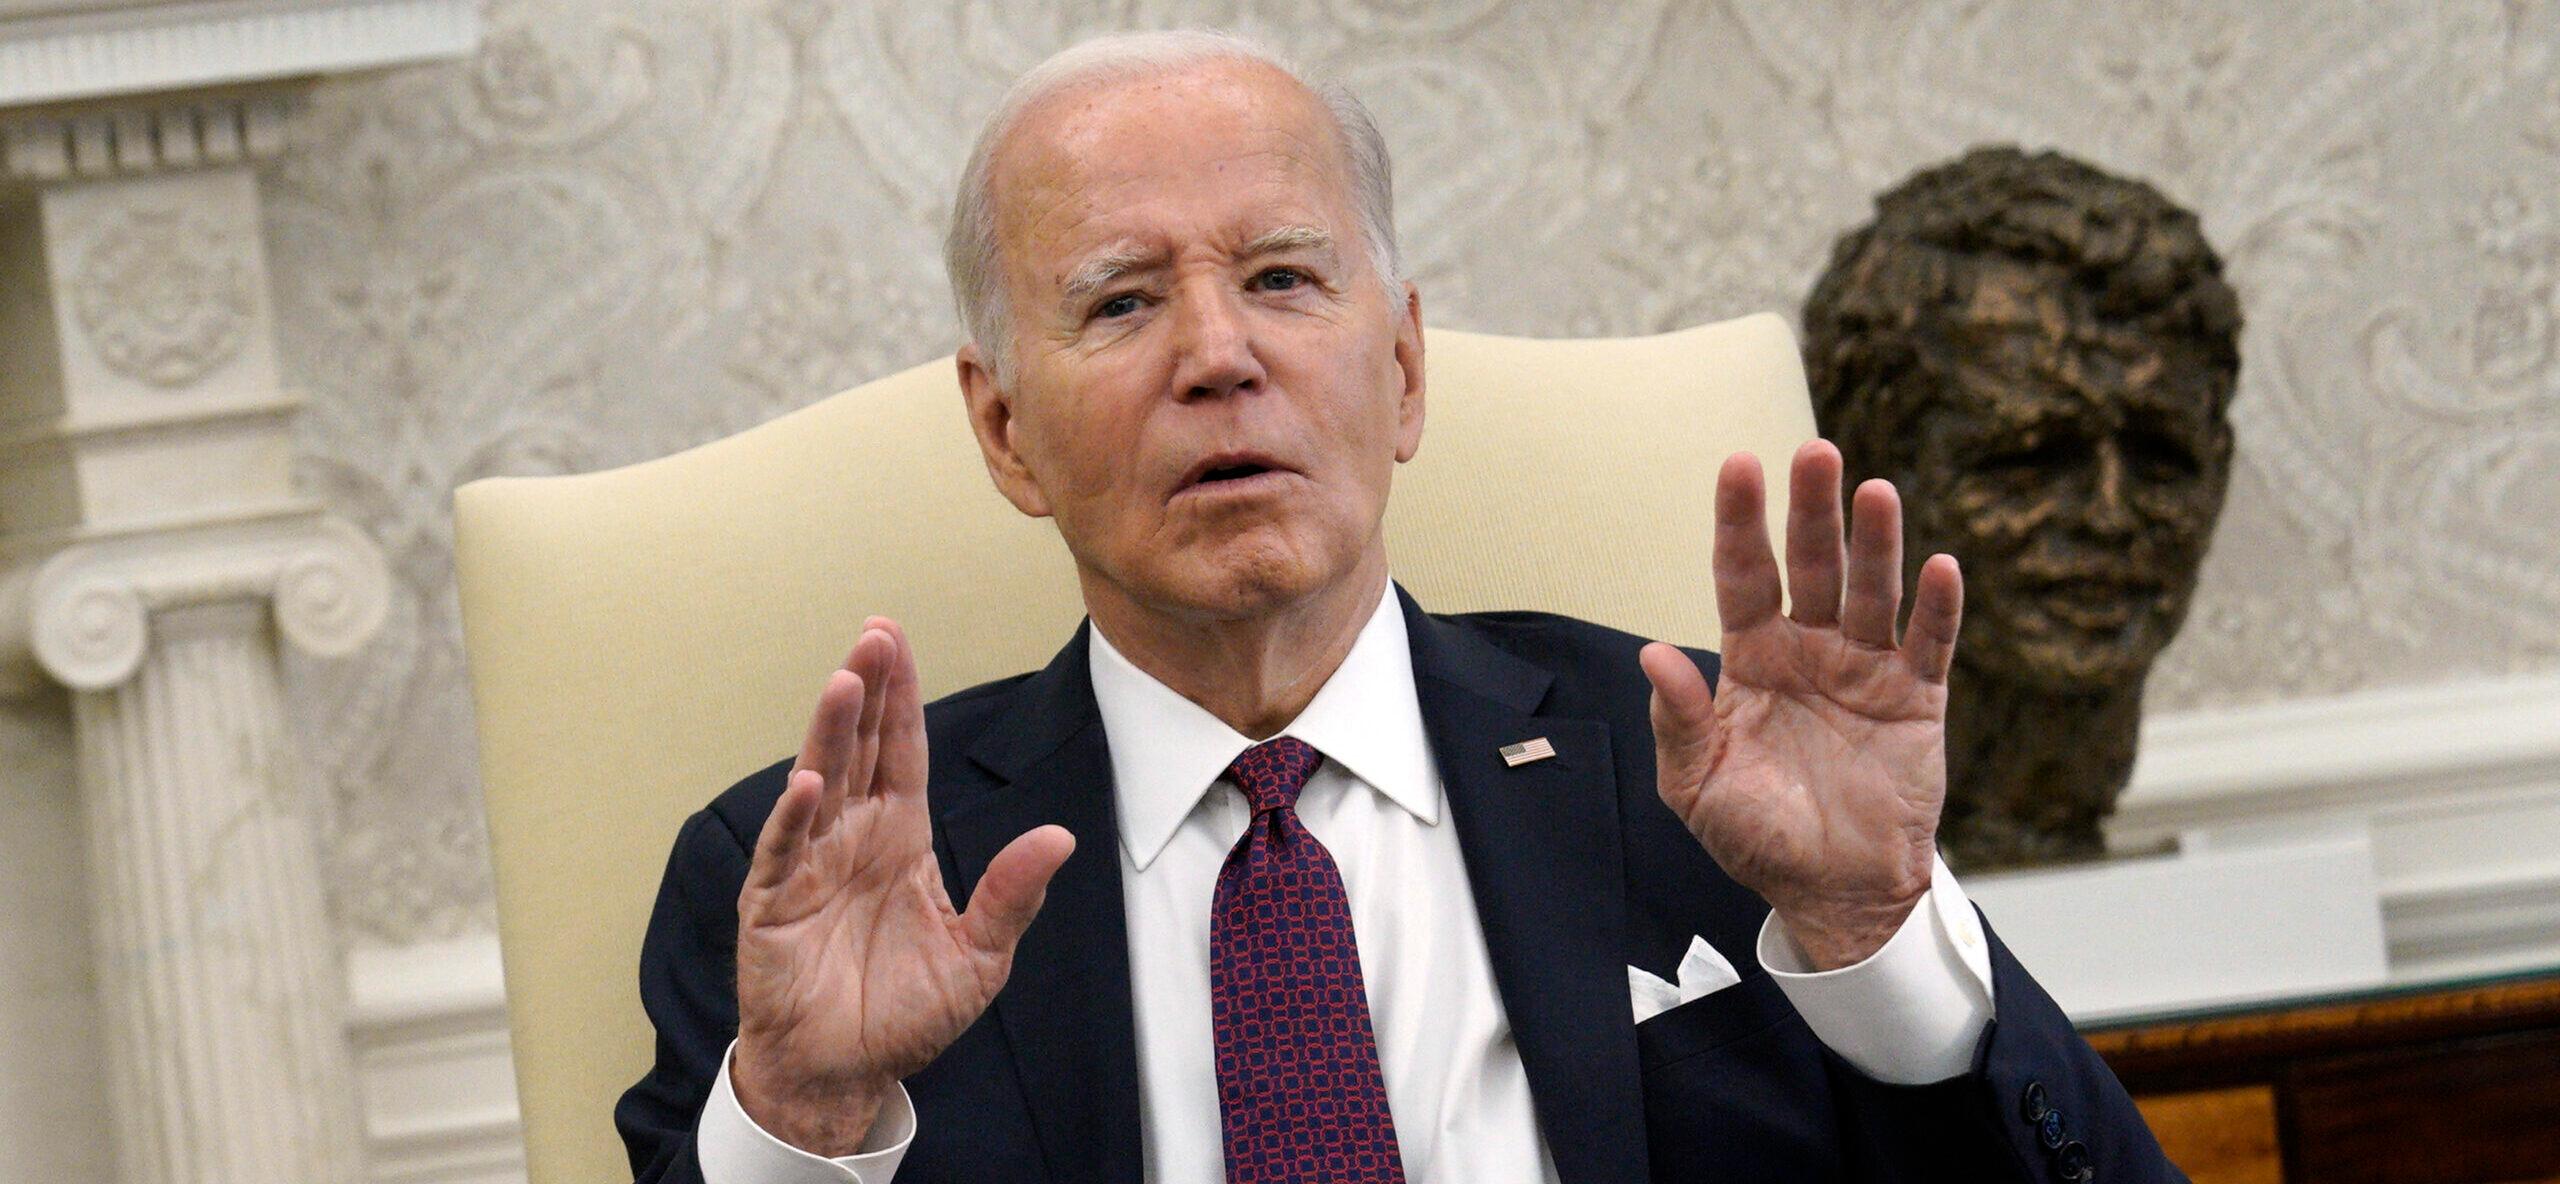 Citizens Are FED UP With Joe Biden Amid 'Pathetic' Viral Video